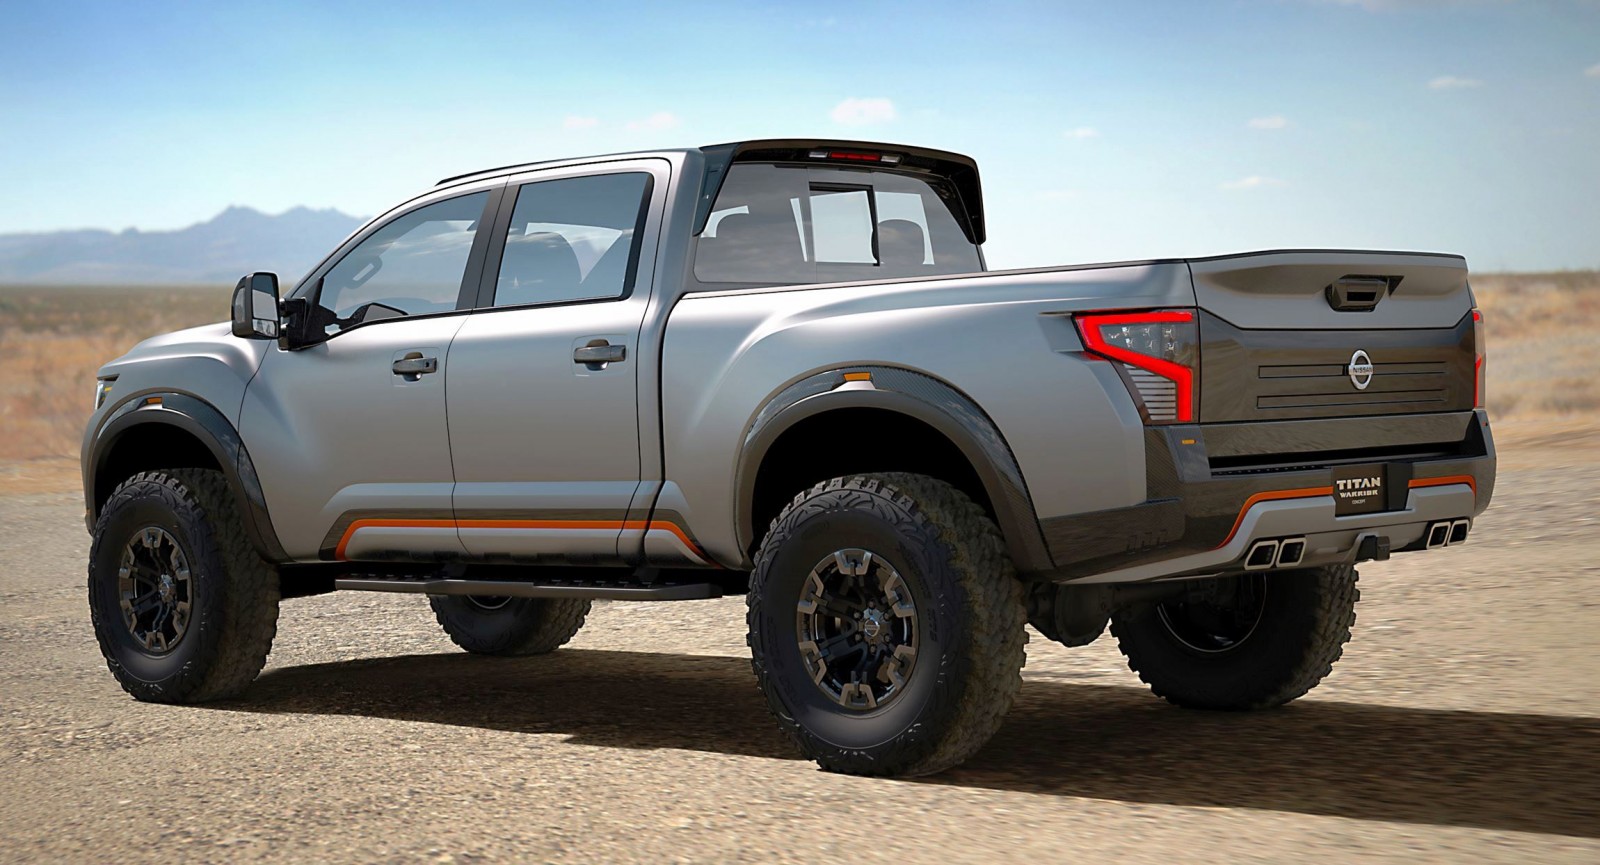 Best modifications for nissan titan #5